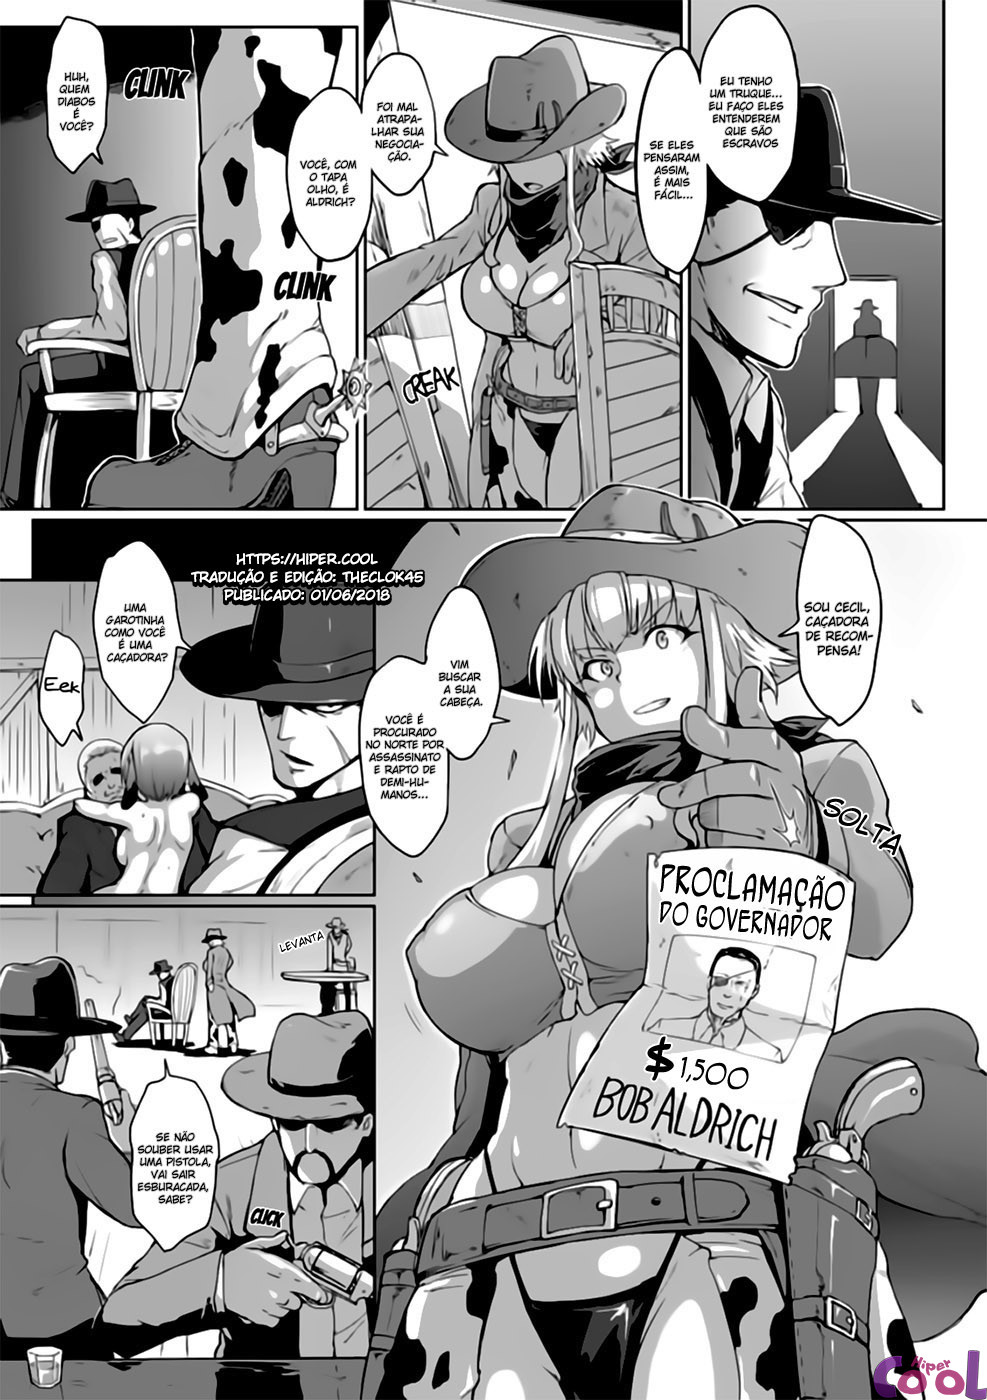 dropout-chapter-05-page-03.jpg